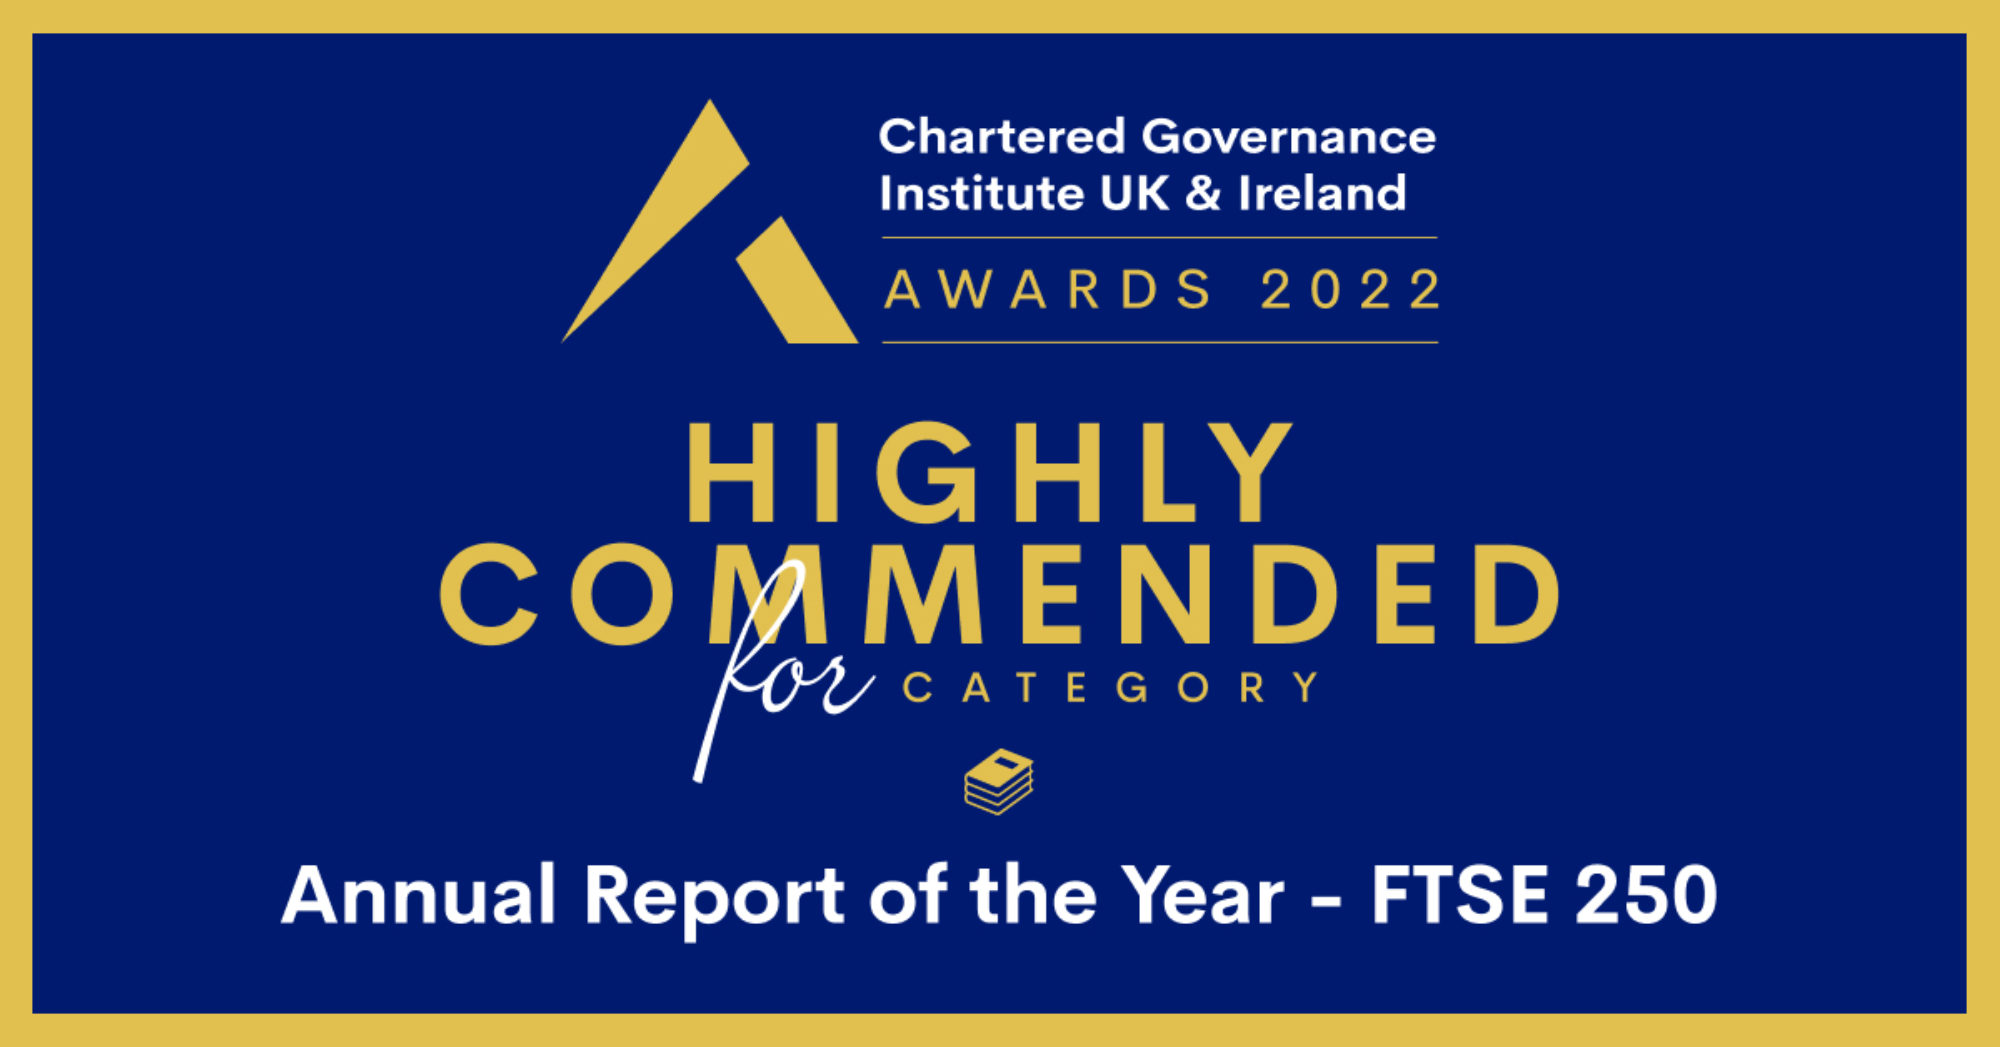 Highly Commended Annual Report of the Year FTSE 250 at the CGI Awards